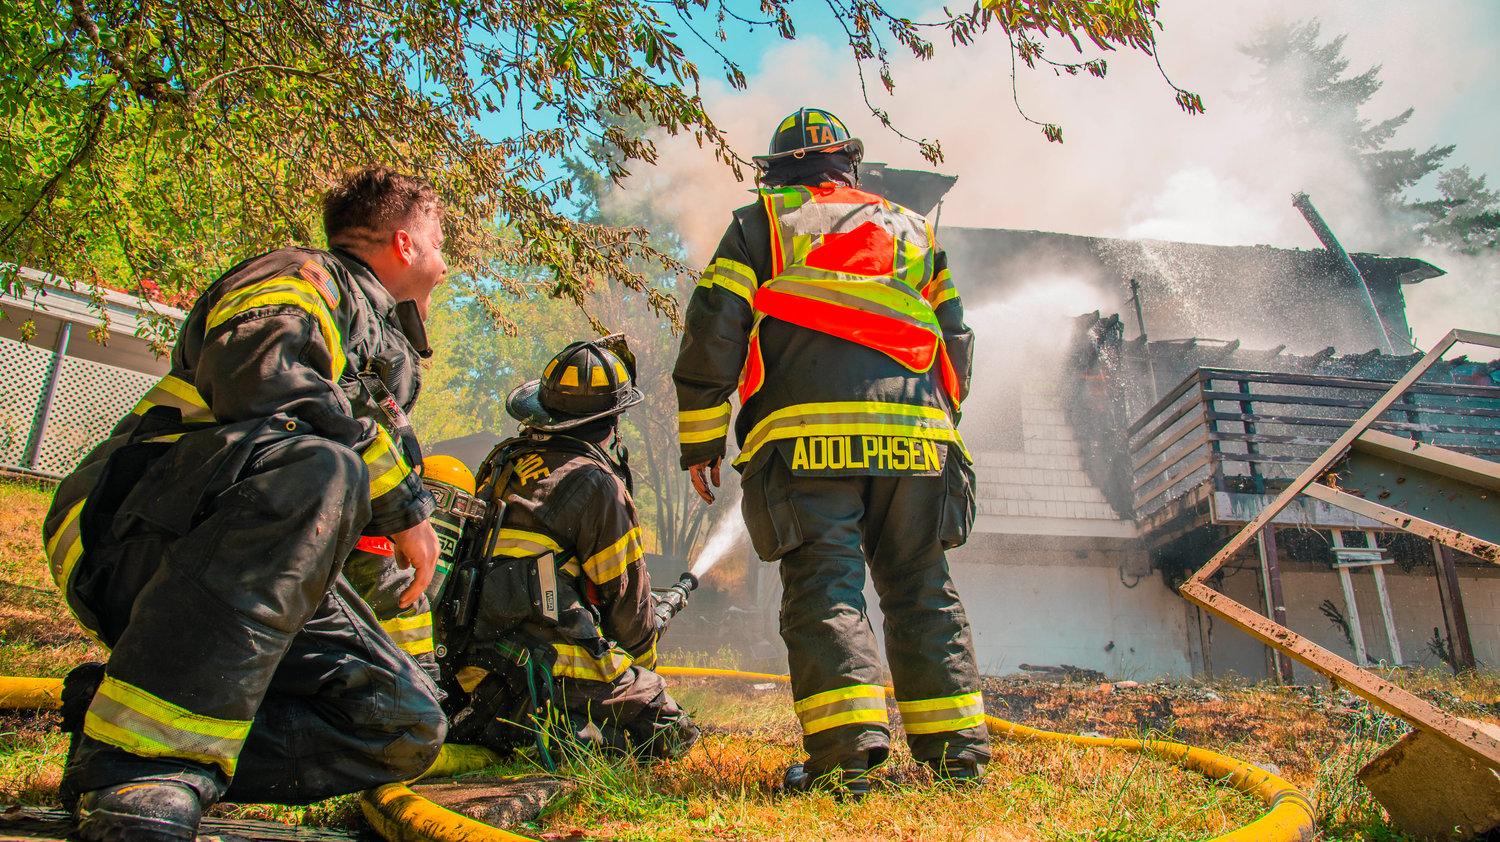 Riverside Fire Authority firefighters work to put out flames at a residential structure on East Third Street in Centralia on Thursday.